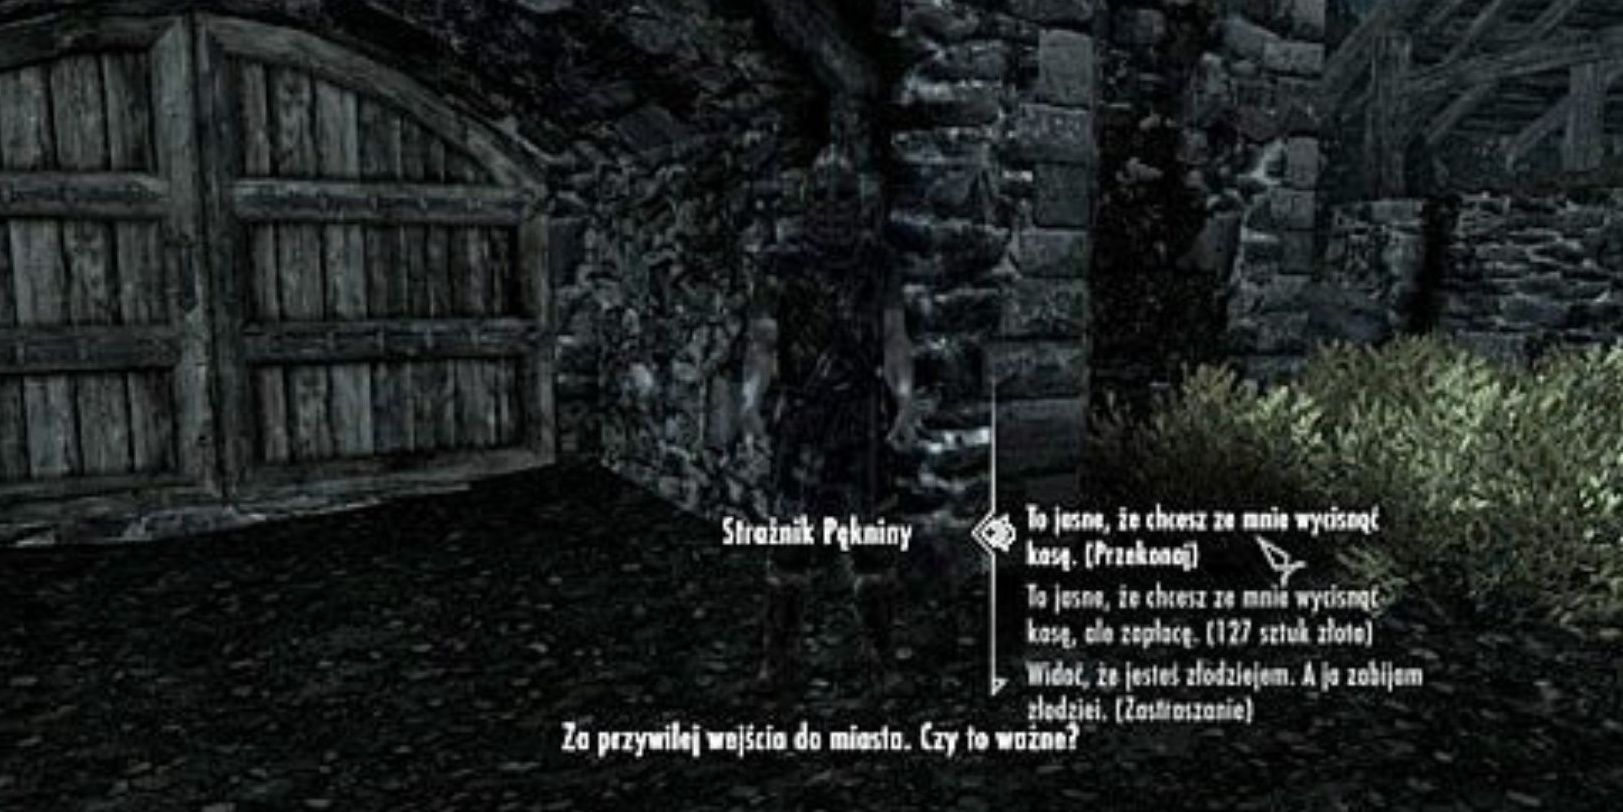 Speech Dialogue Options for Guard outside Riften, in a foreign language